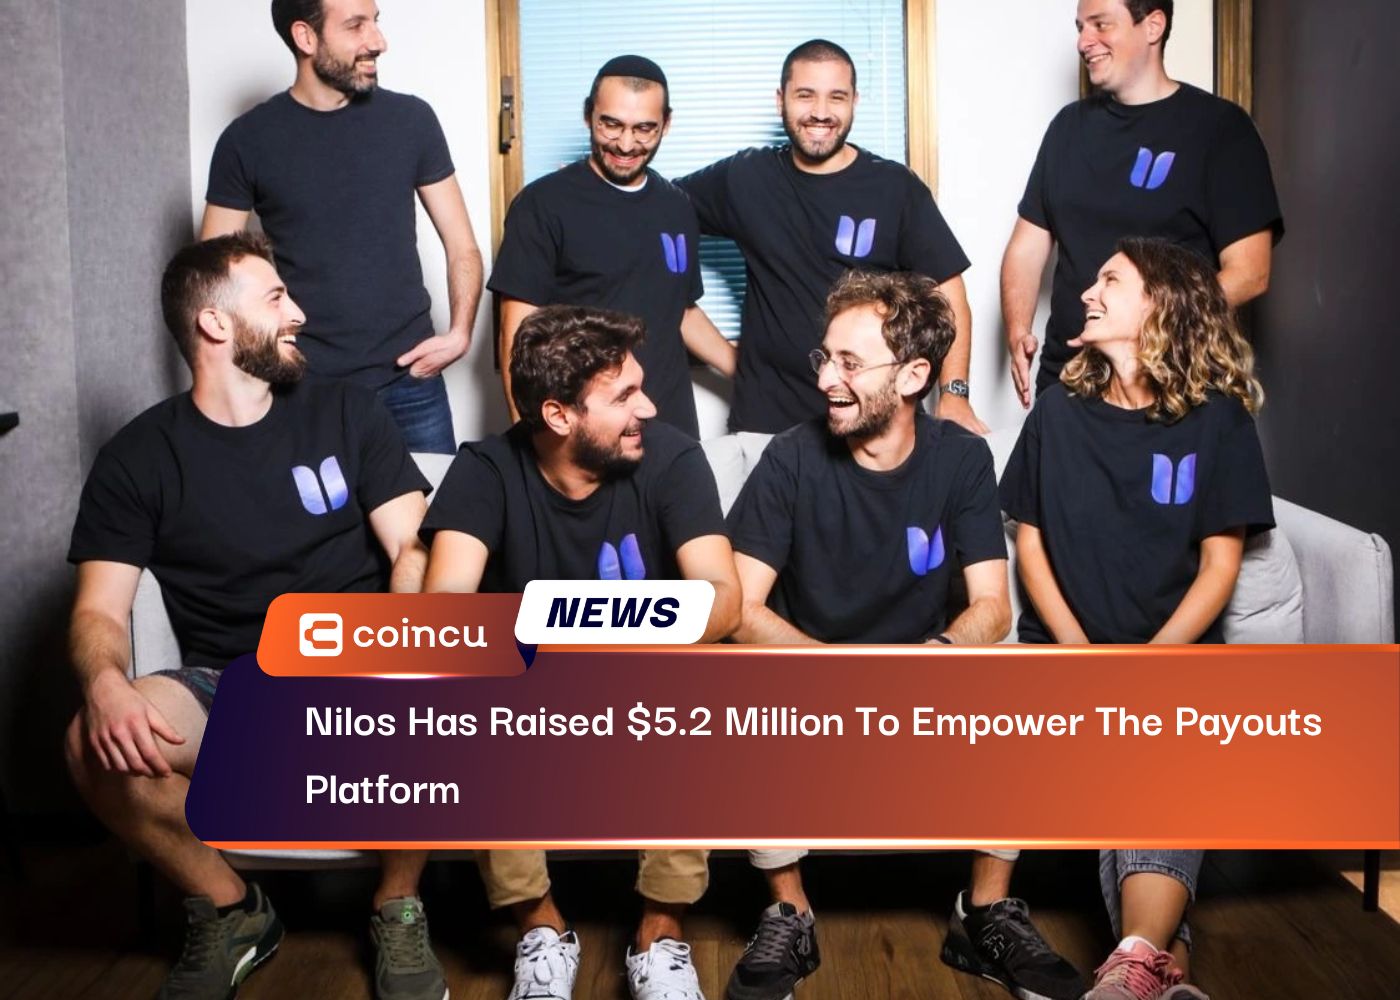 Nilos Has Raised $5.2 Million To Empower The Payouts Platform